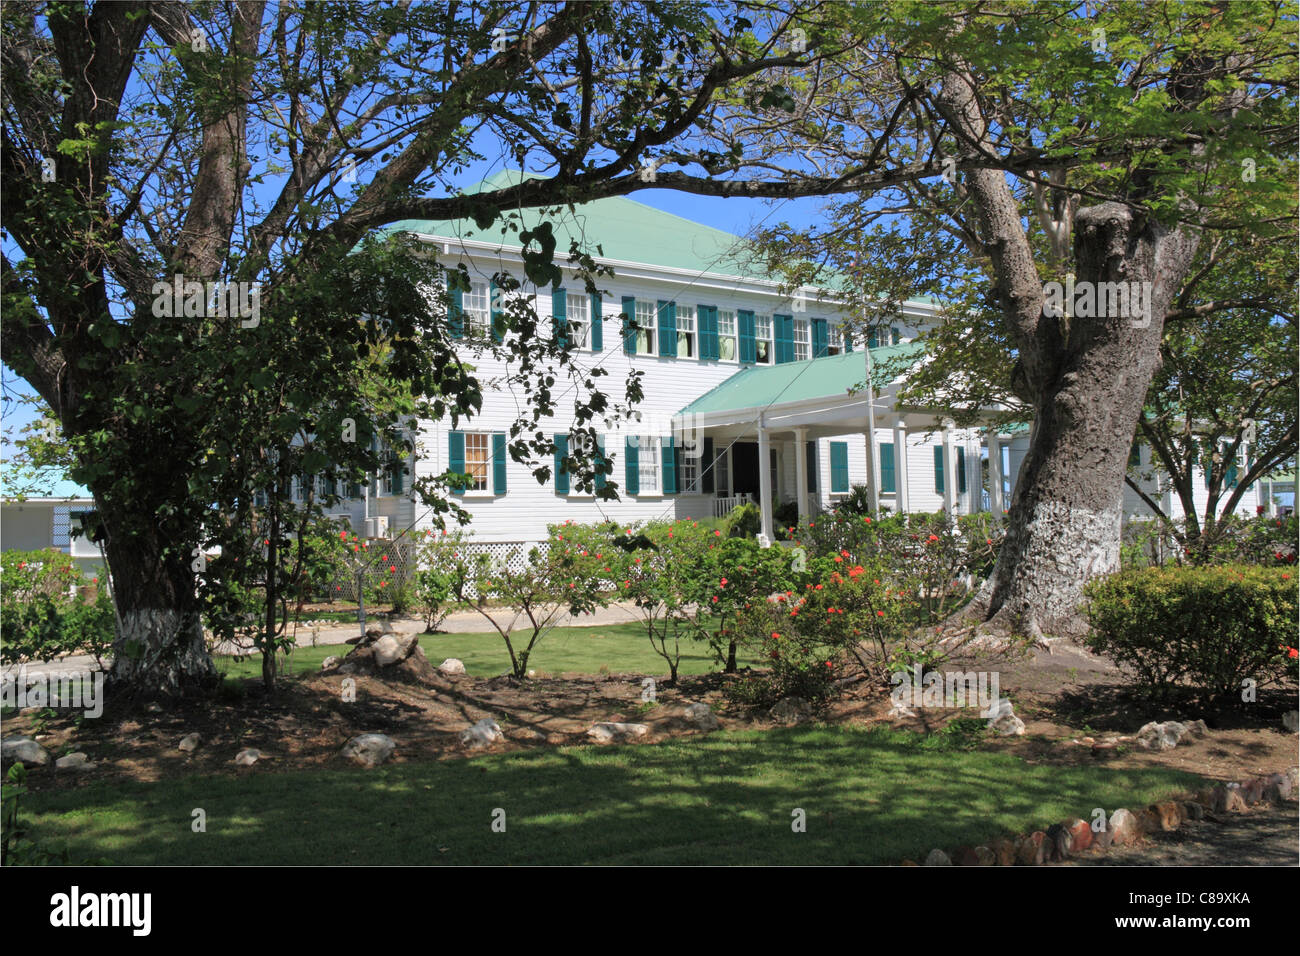 House of Culture, formerly Government House (residence of the British Governor), Belize City, Belize, Caribbean, Central America Stock Photo